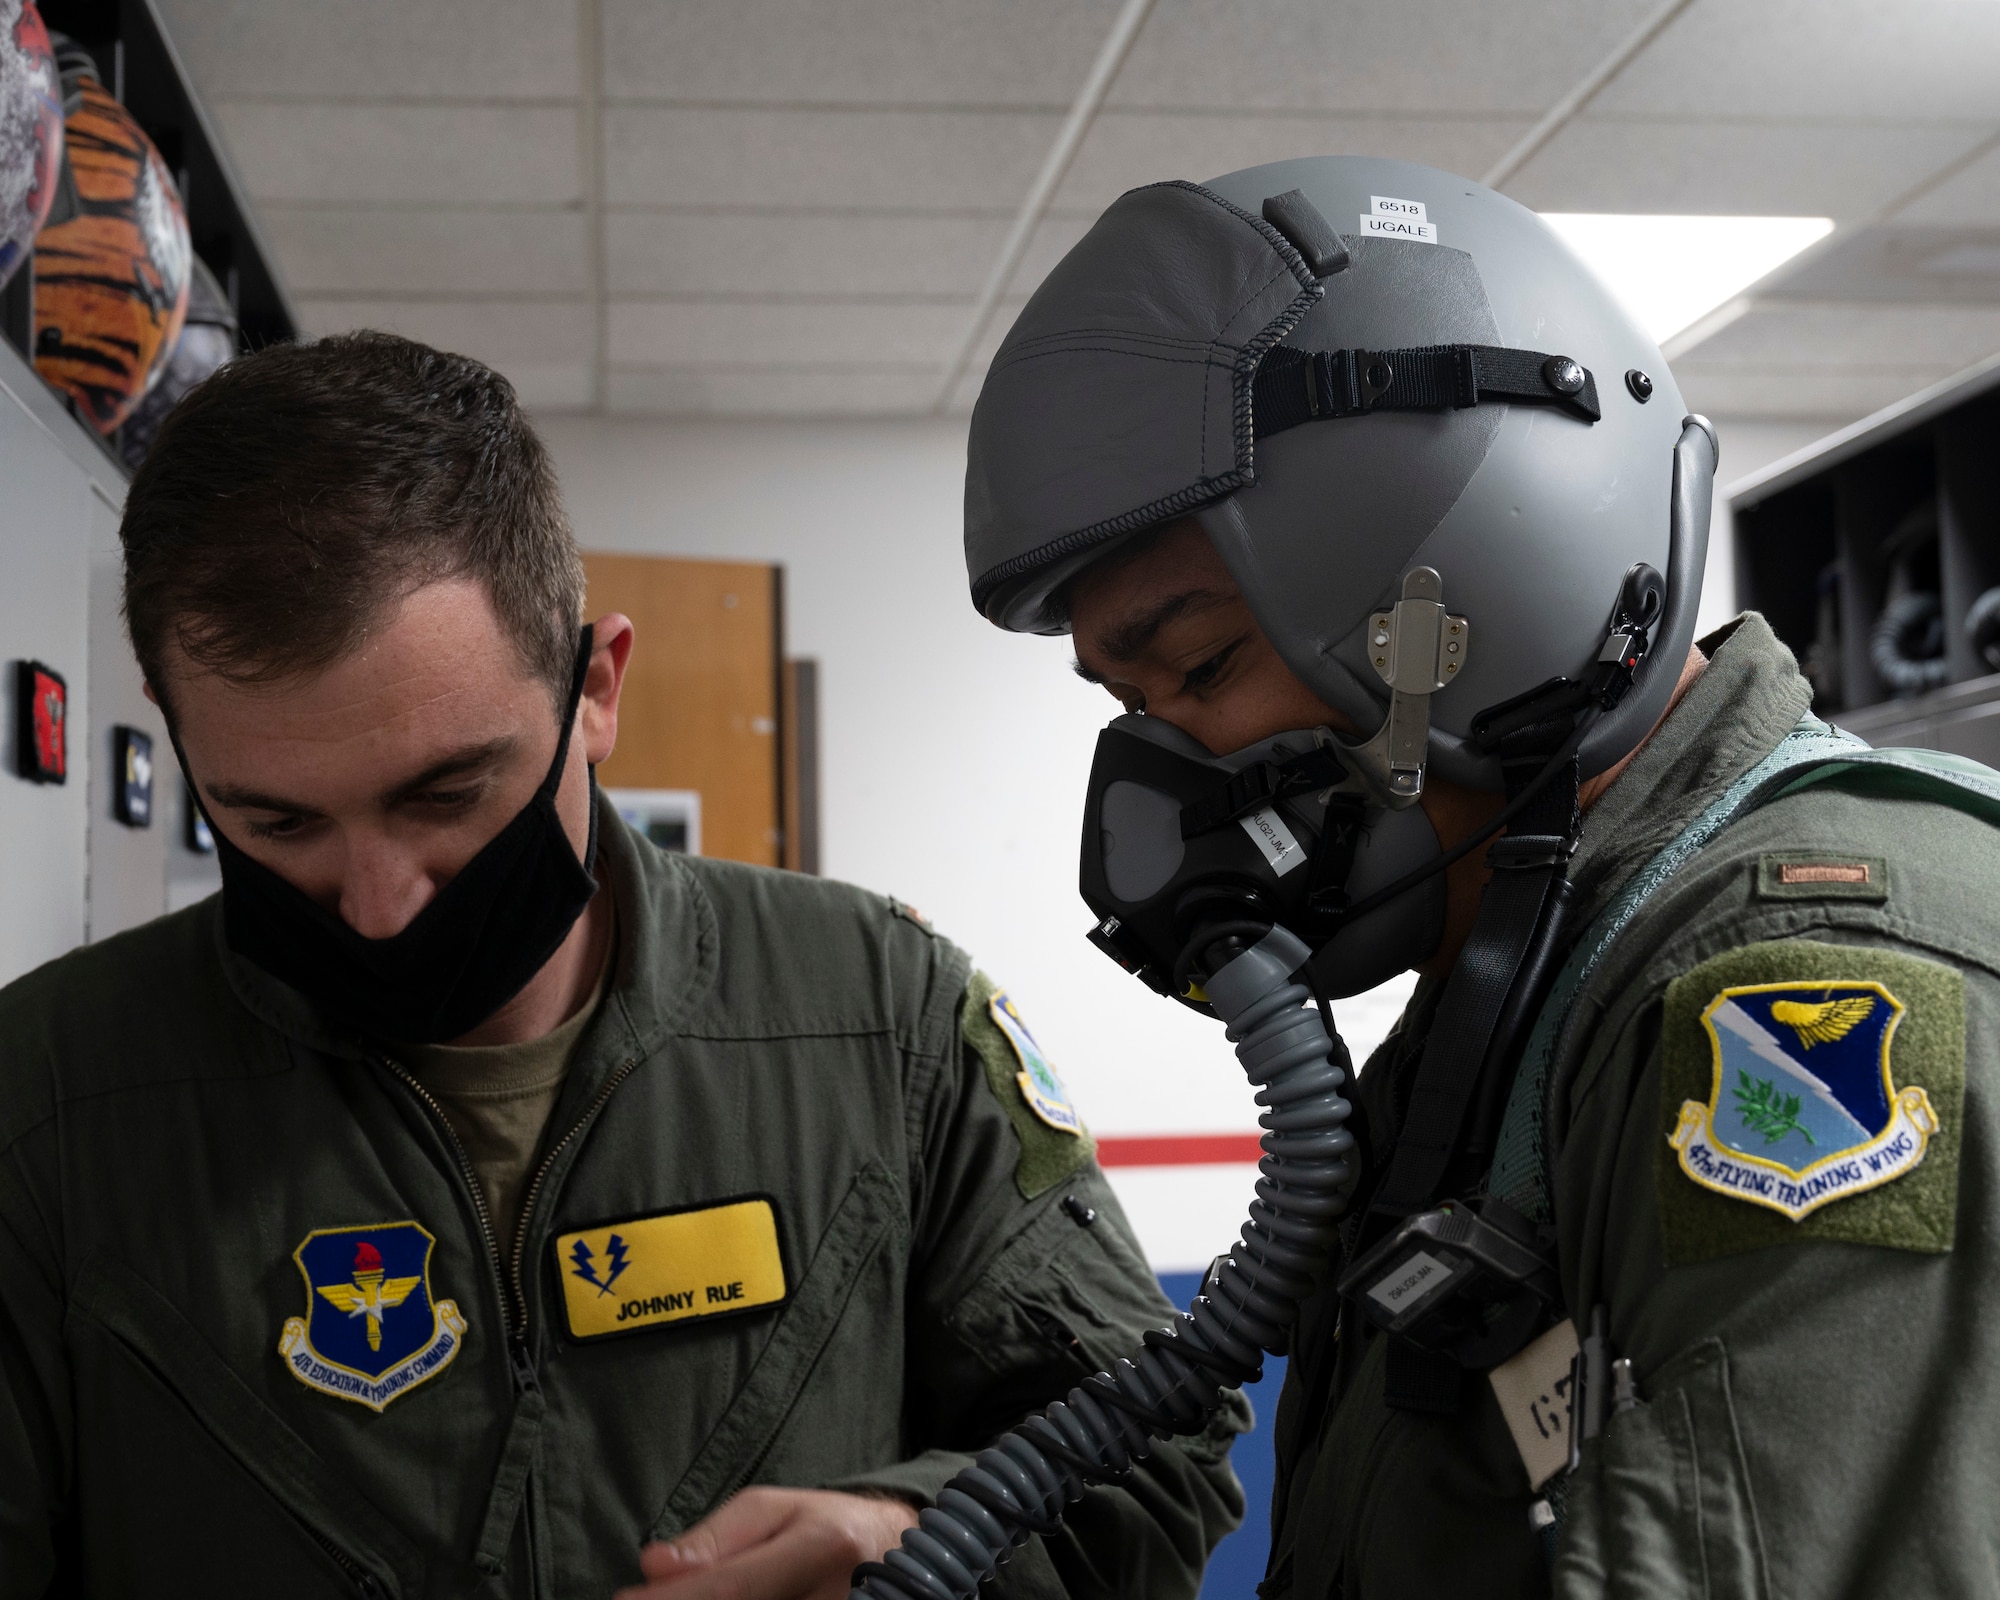 U.S. Air Force 2nd Lt. Johnny Rue, left checks the equipment of fellow student U.S. Air Force 2nd Lt. Christopher Ugale, both with the 47th Student Squadron, before Ugale’s dollar ride flight at Laughlin Air Force Base, Texas on August 4, 2021. Equipment checks are a vital part of preparations for a flight and help ensure a pilot’s safety while flying. (U.S. Air Force Photo by Senior Airman Nicholas Larsen)